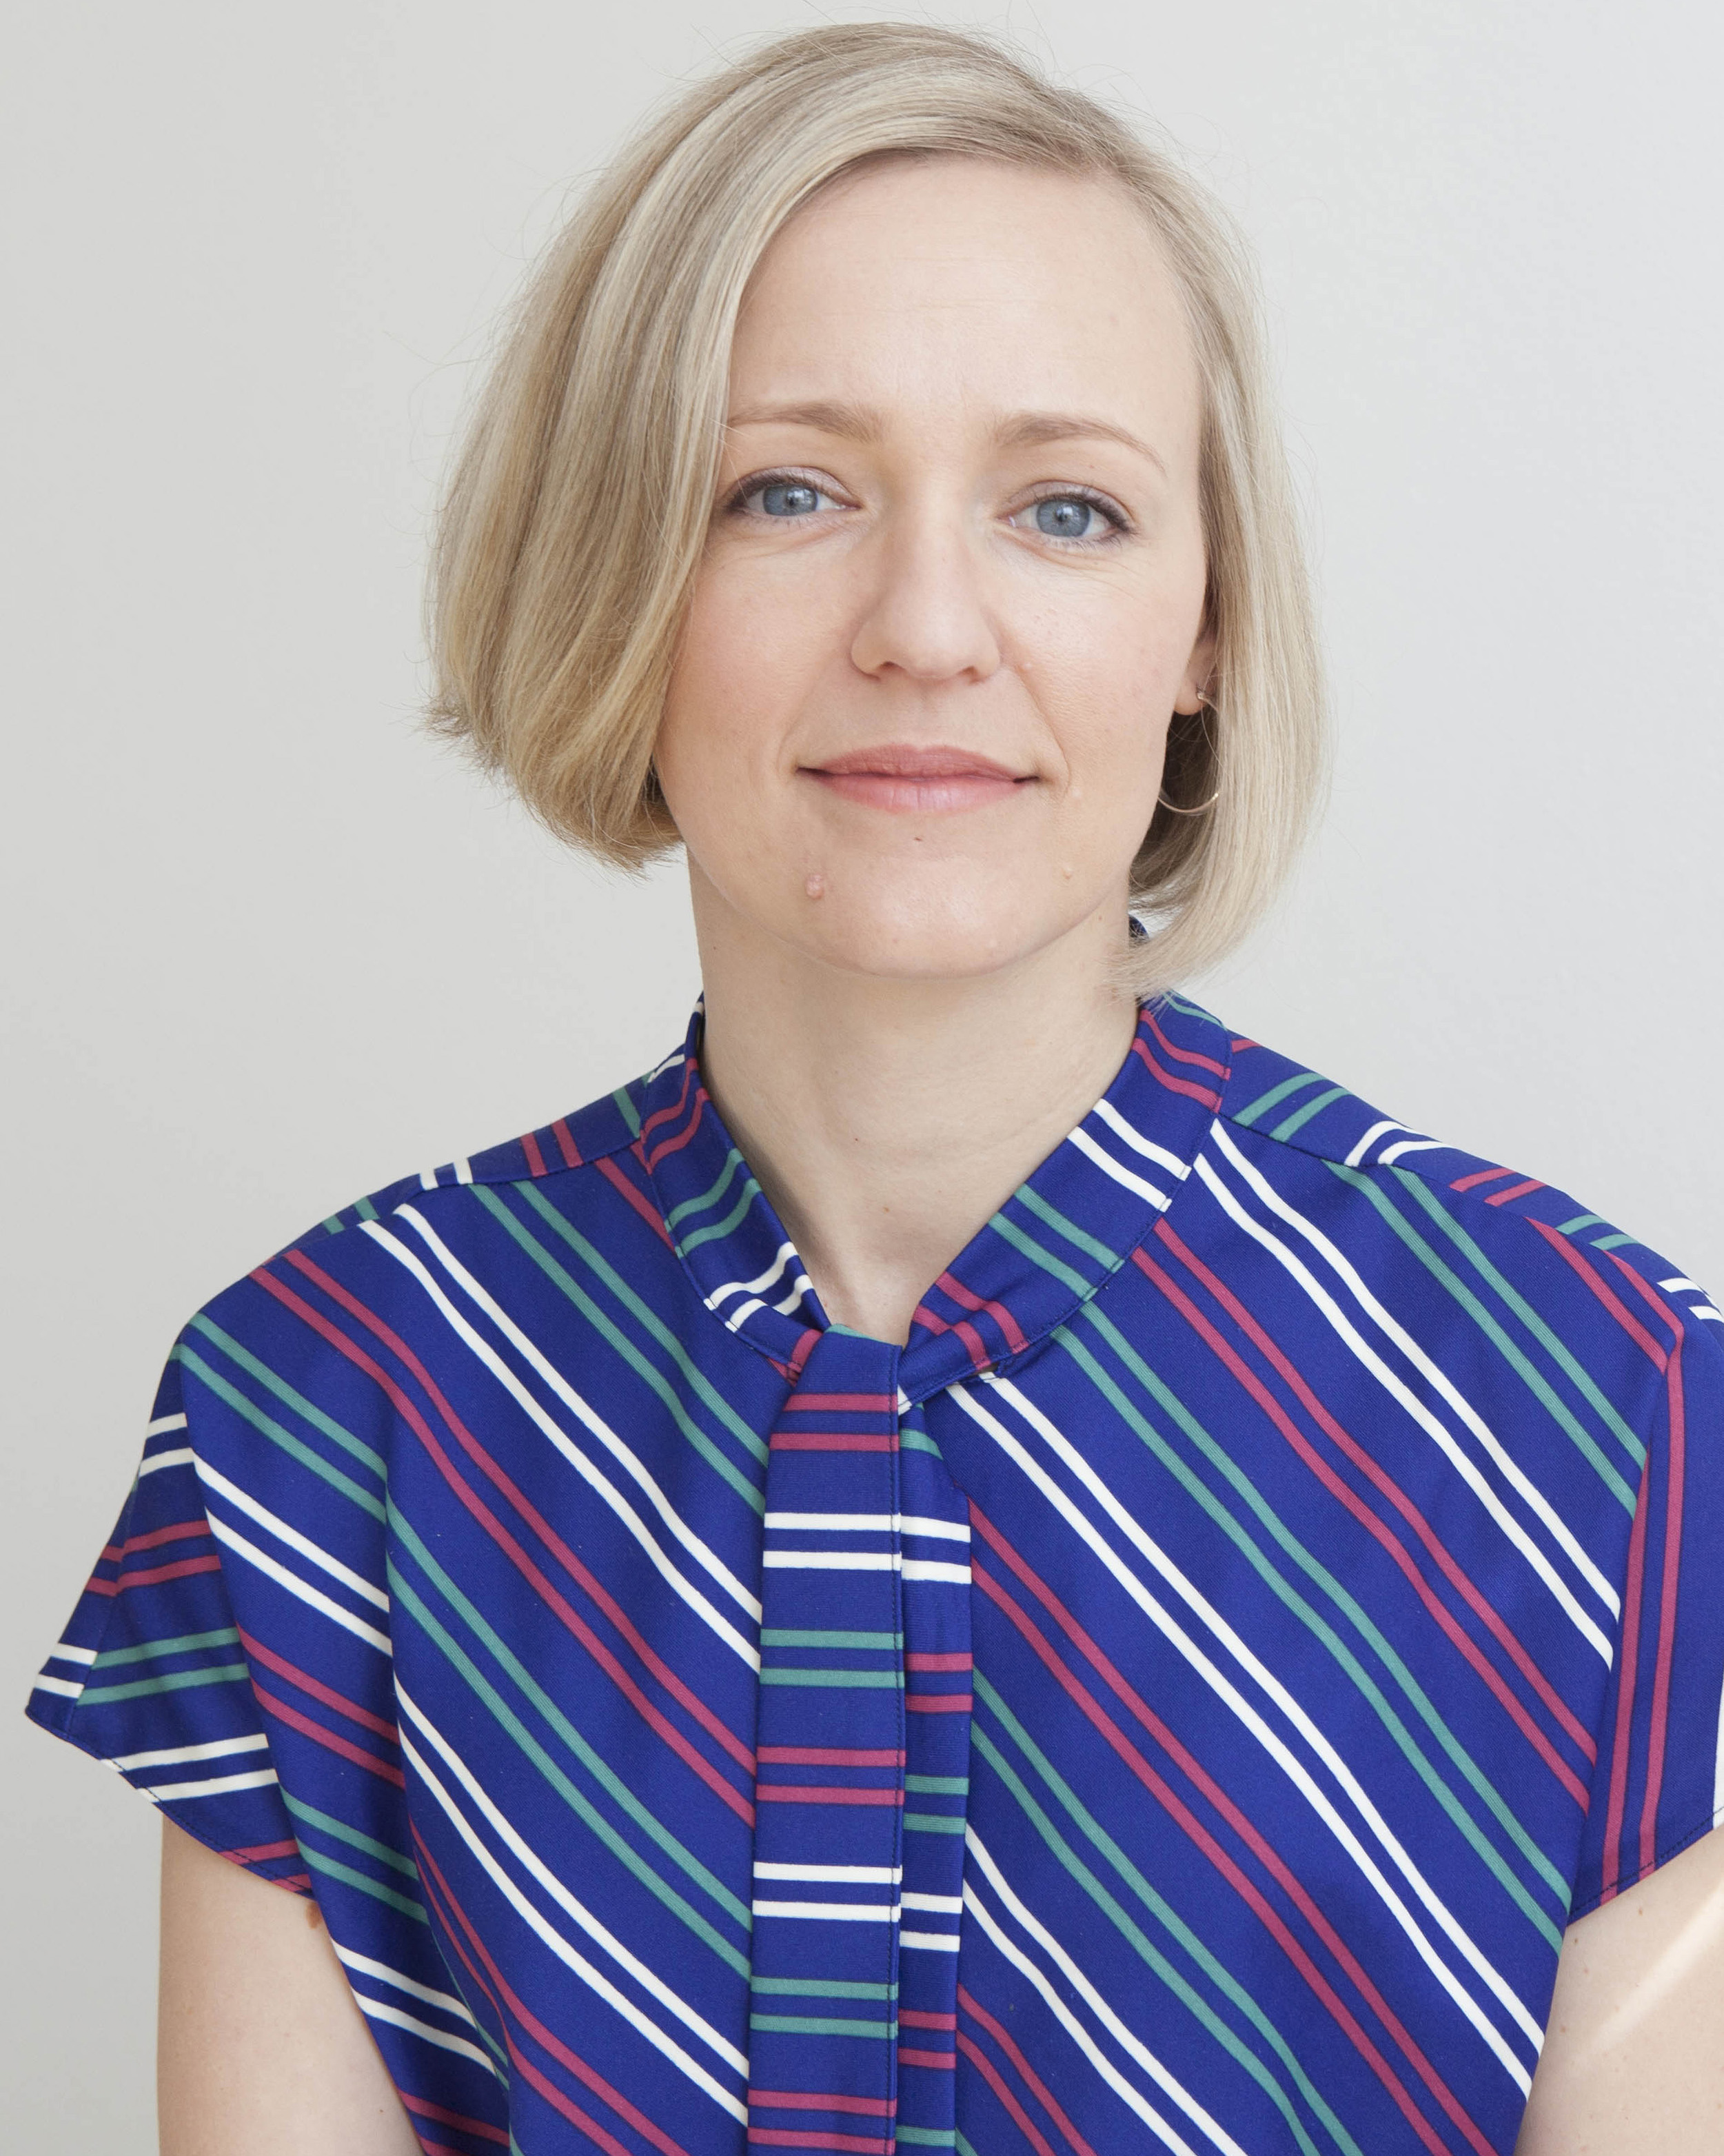 A photo of Rochelle Haley wearing a blue, pink, green, and white striped shirt.